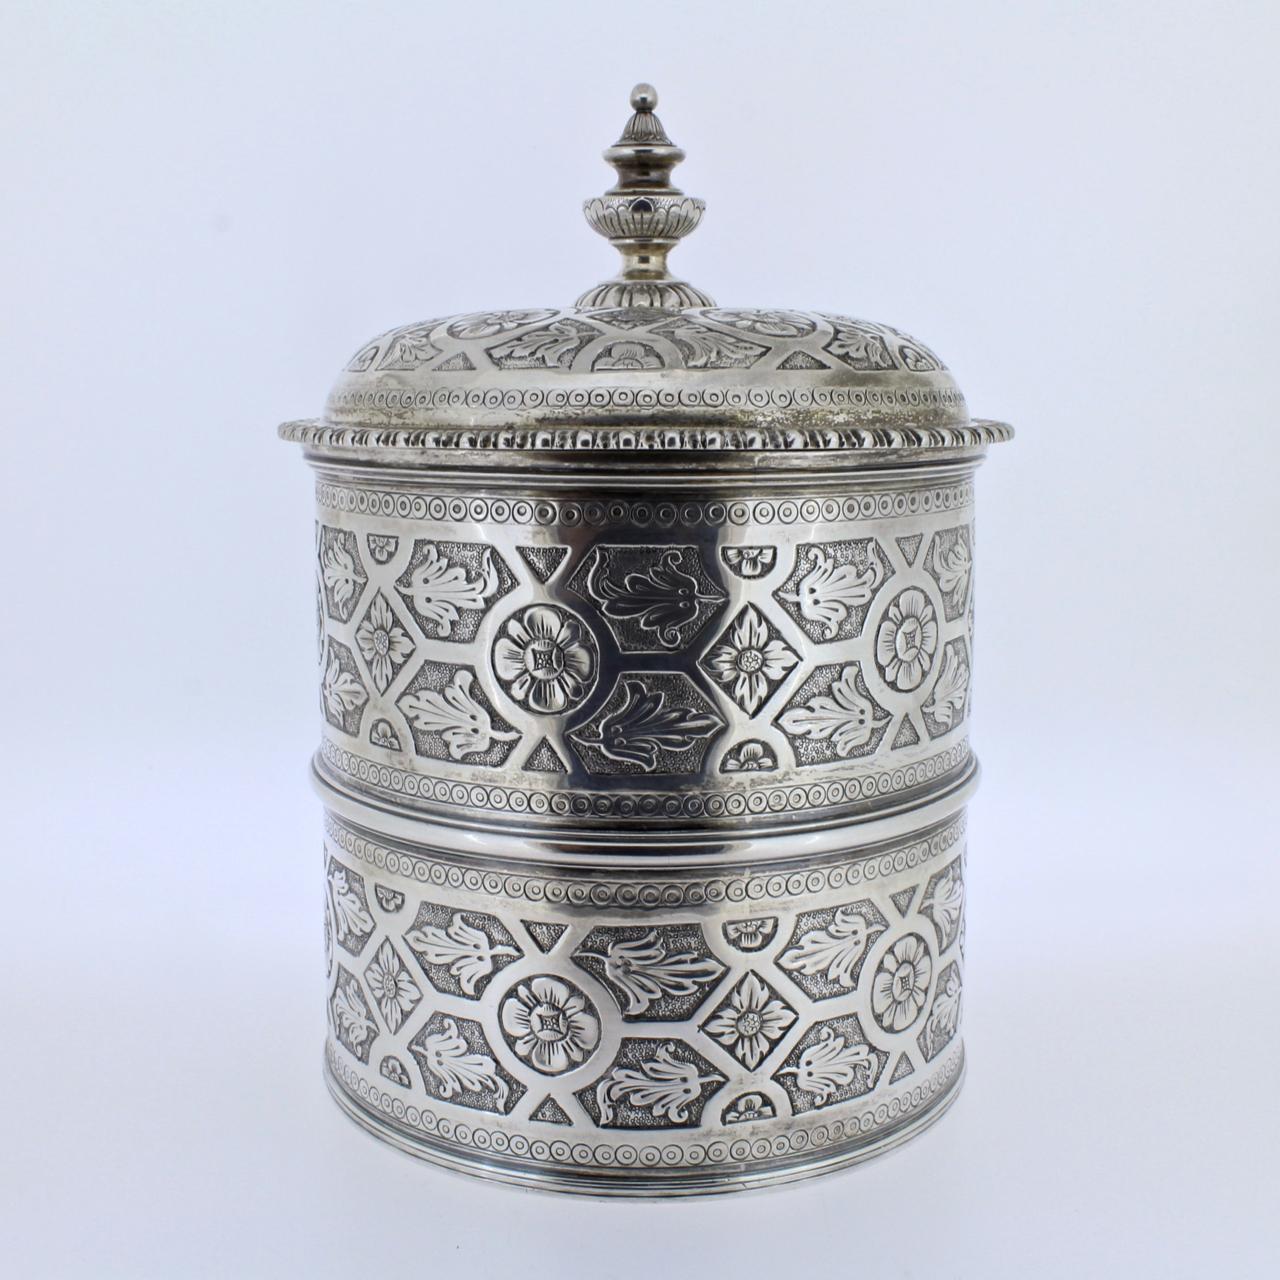 A wonderfully detailed Portuguese covered dresser jar (or humidor) in solid silver by Sarmento, the renowned Portuguese jewelers and silversmiths.

A domed and gadrooned lid covers the two-sectioned body of this jar. Both cover and jar have